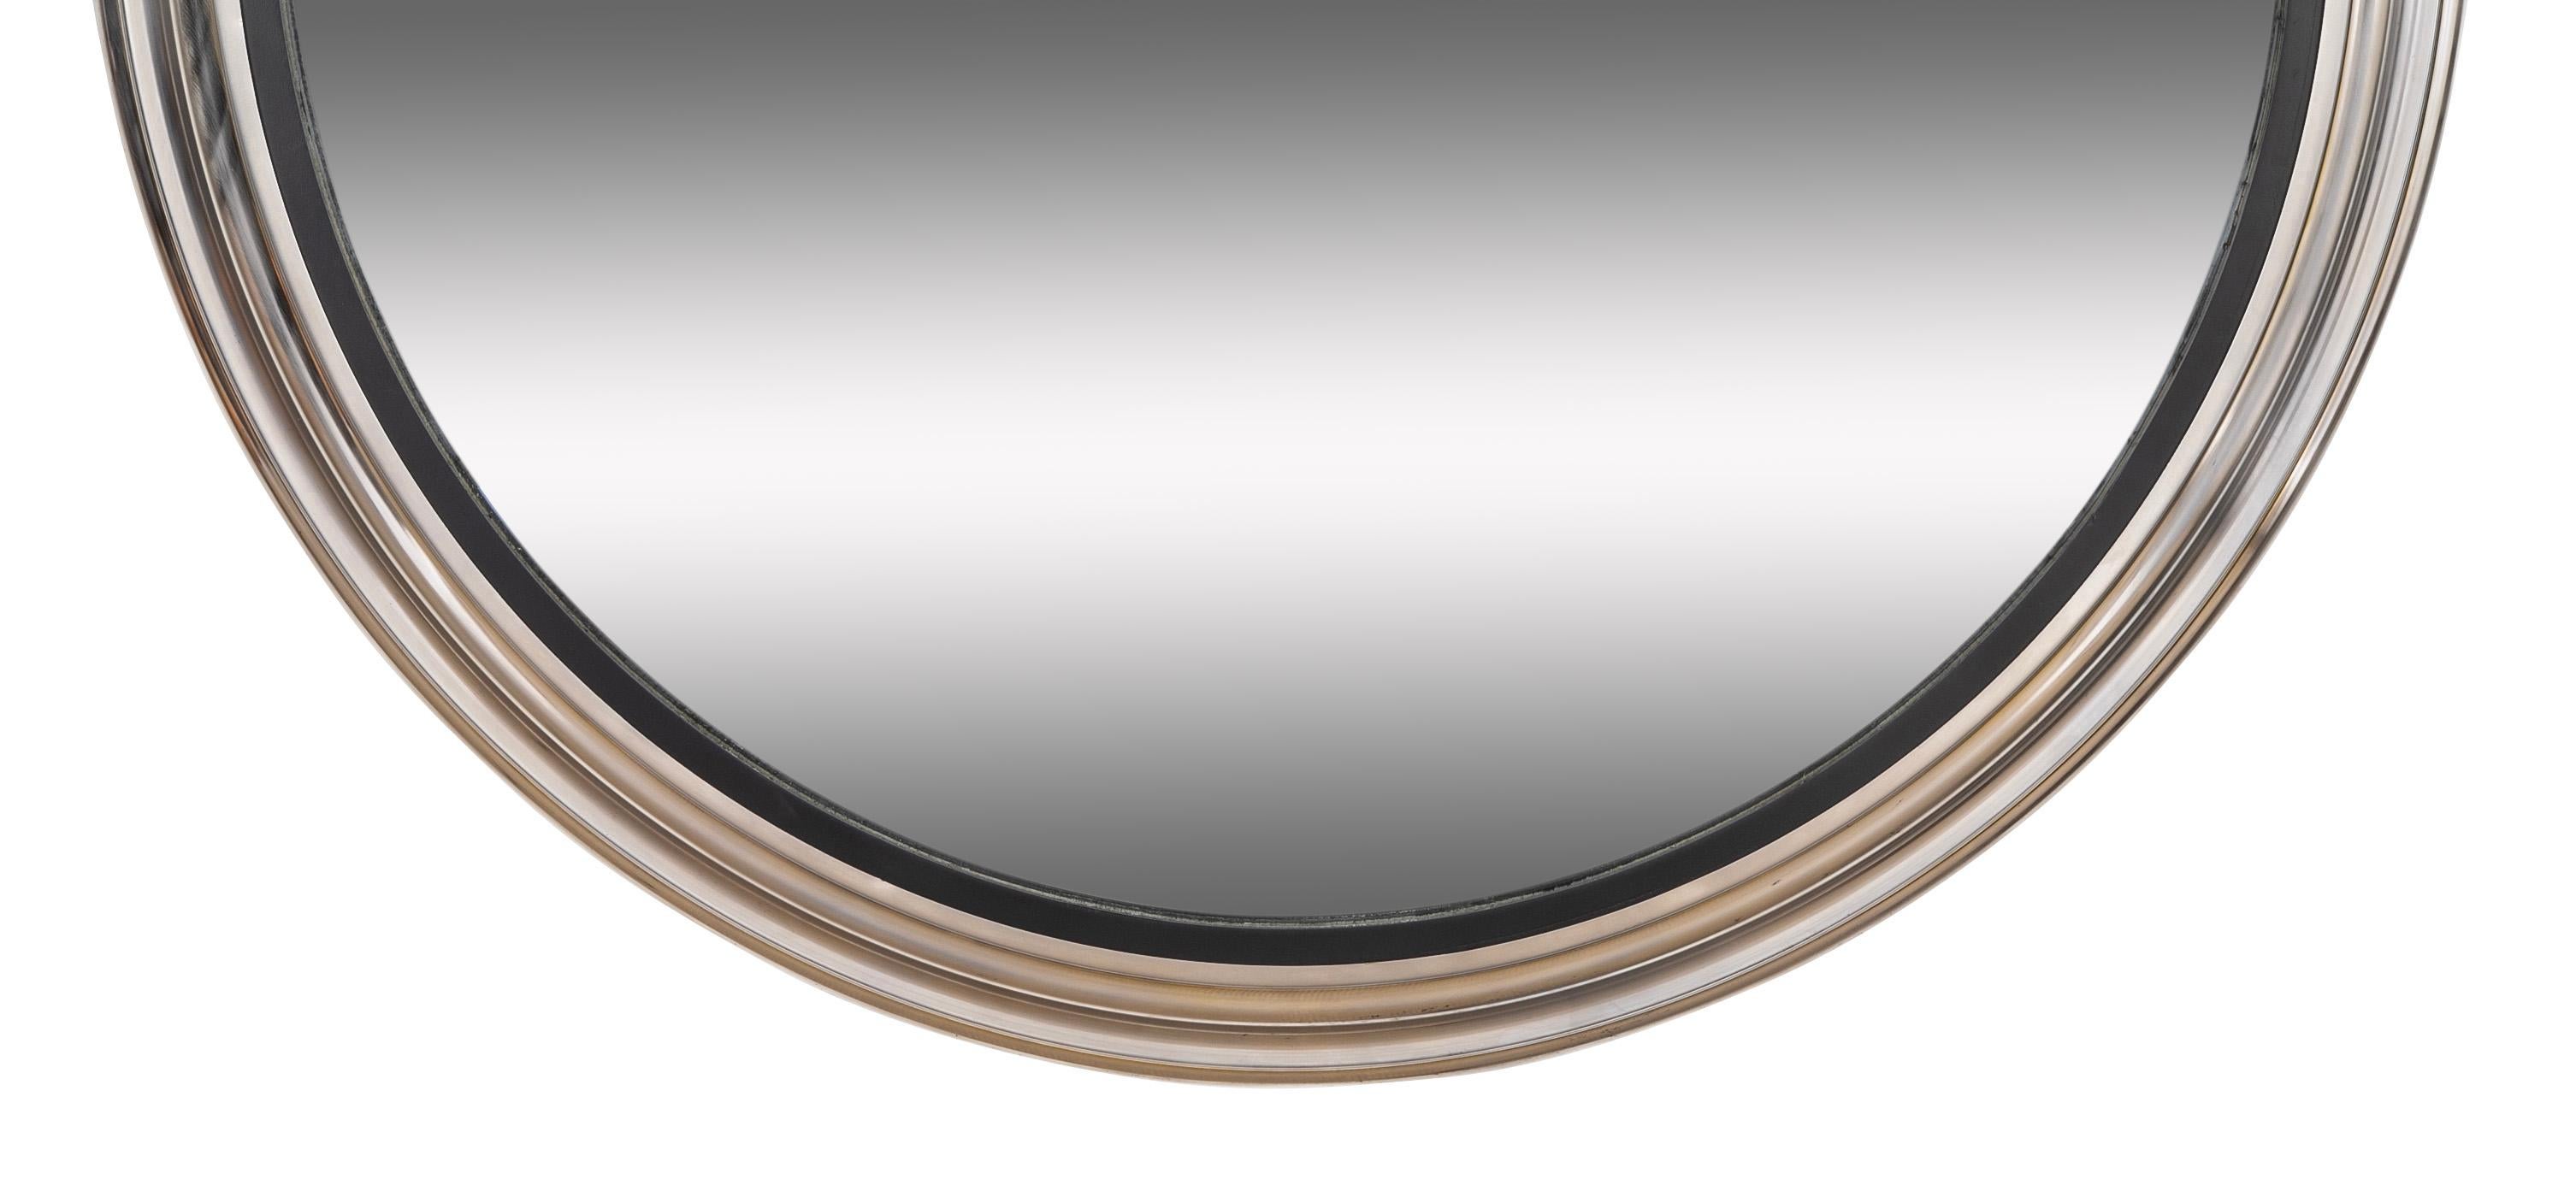 An elegant large scale convex mirror, the frame of rolled steel with ogee molding, with brushed finish. A great fit for both modern and classical interiors, a pared down contemporary take on the Neoclassical and Regency style. Custom made, circa